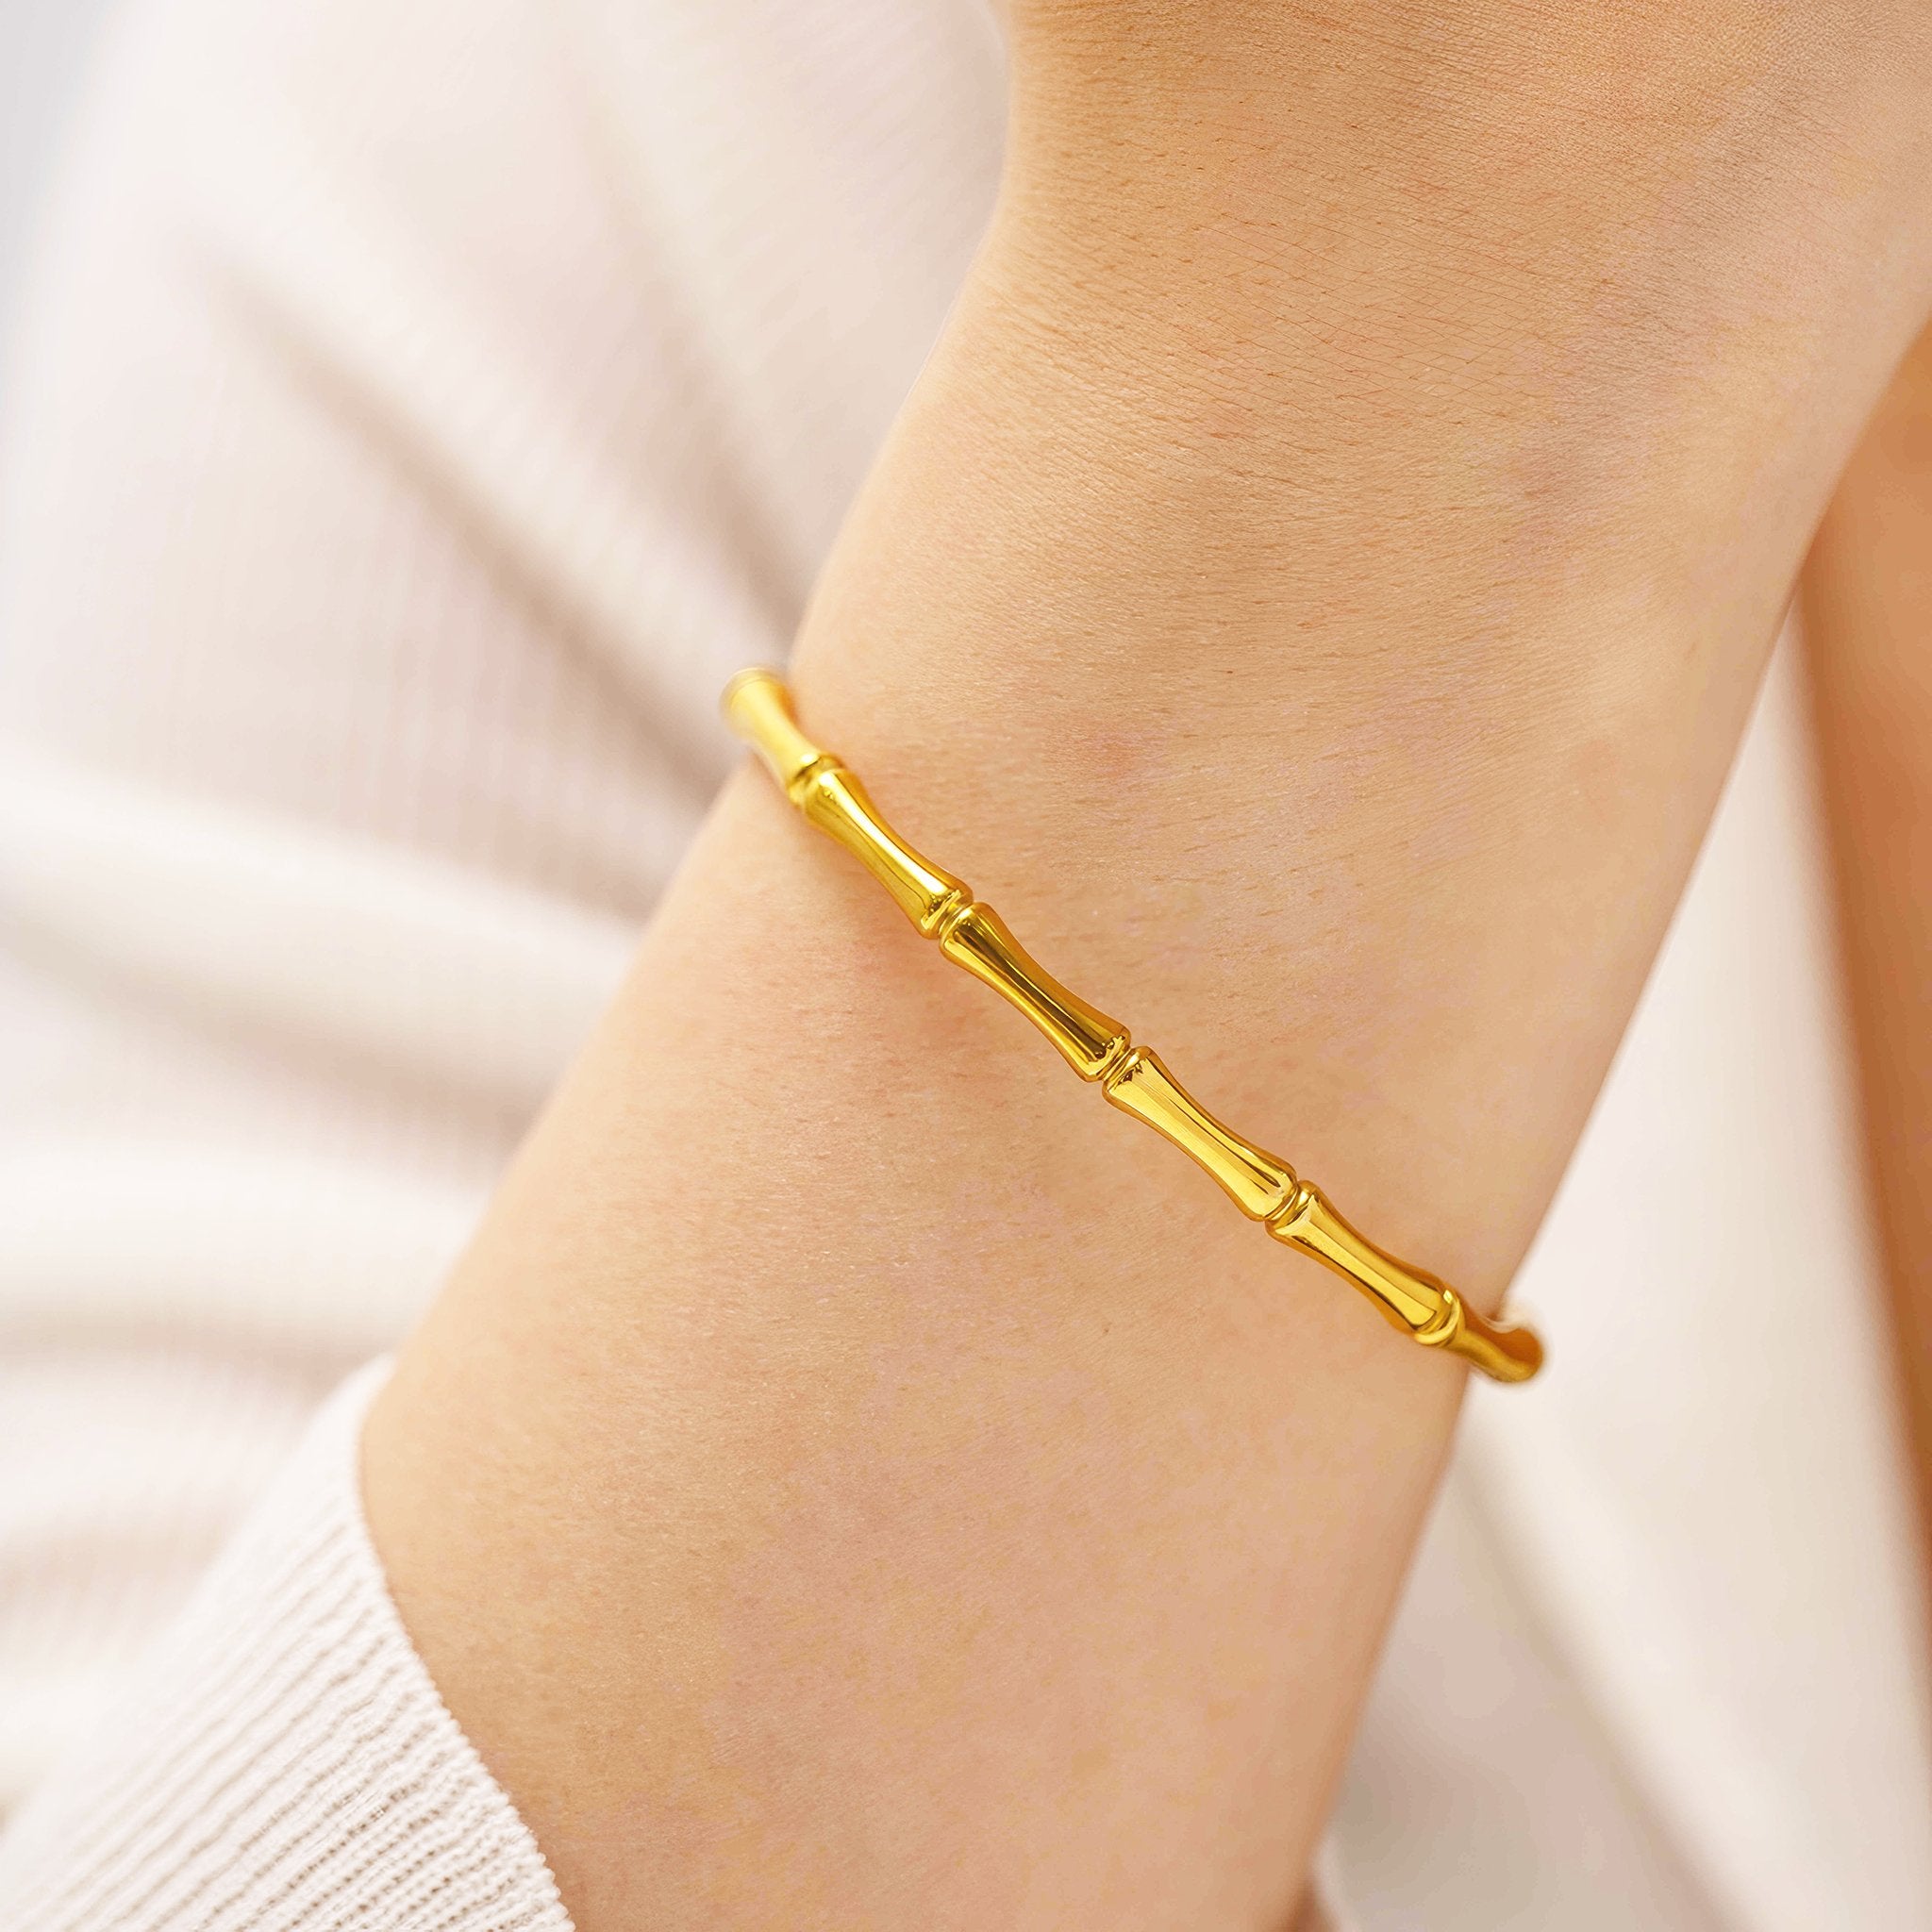 Bamboo Inspired Bracelet - Nobbier - ALL - 18K Gold And Titanium PVD Coated Jewelry